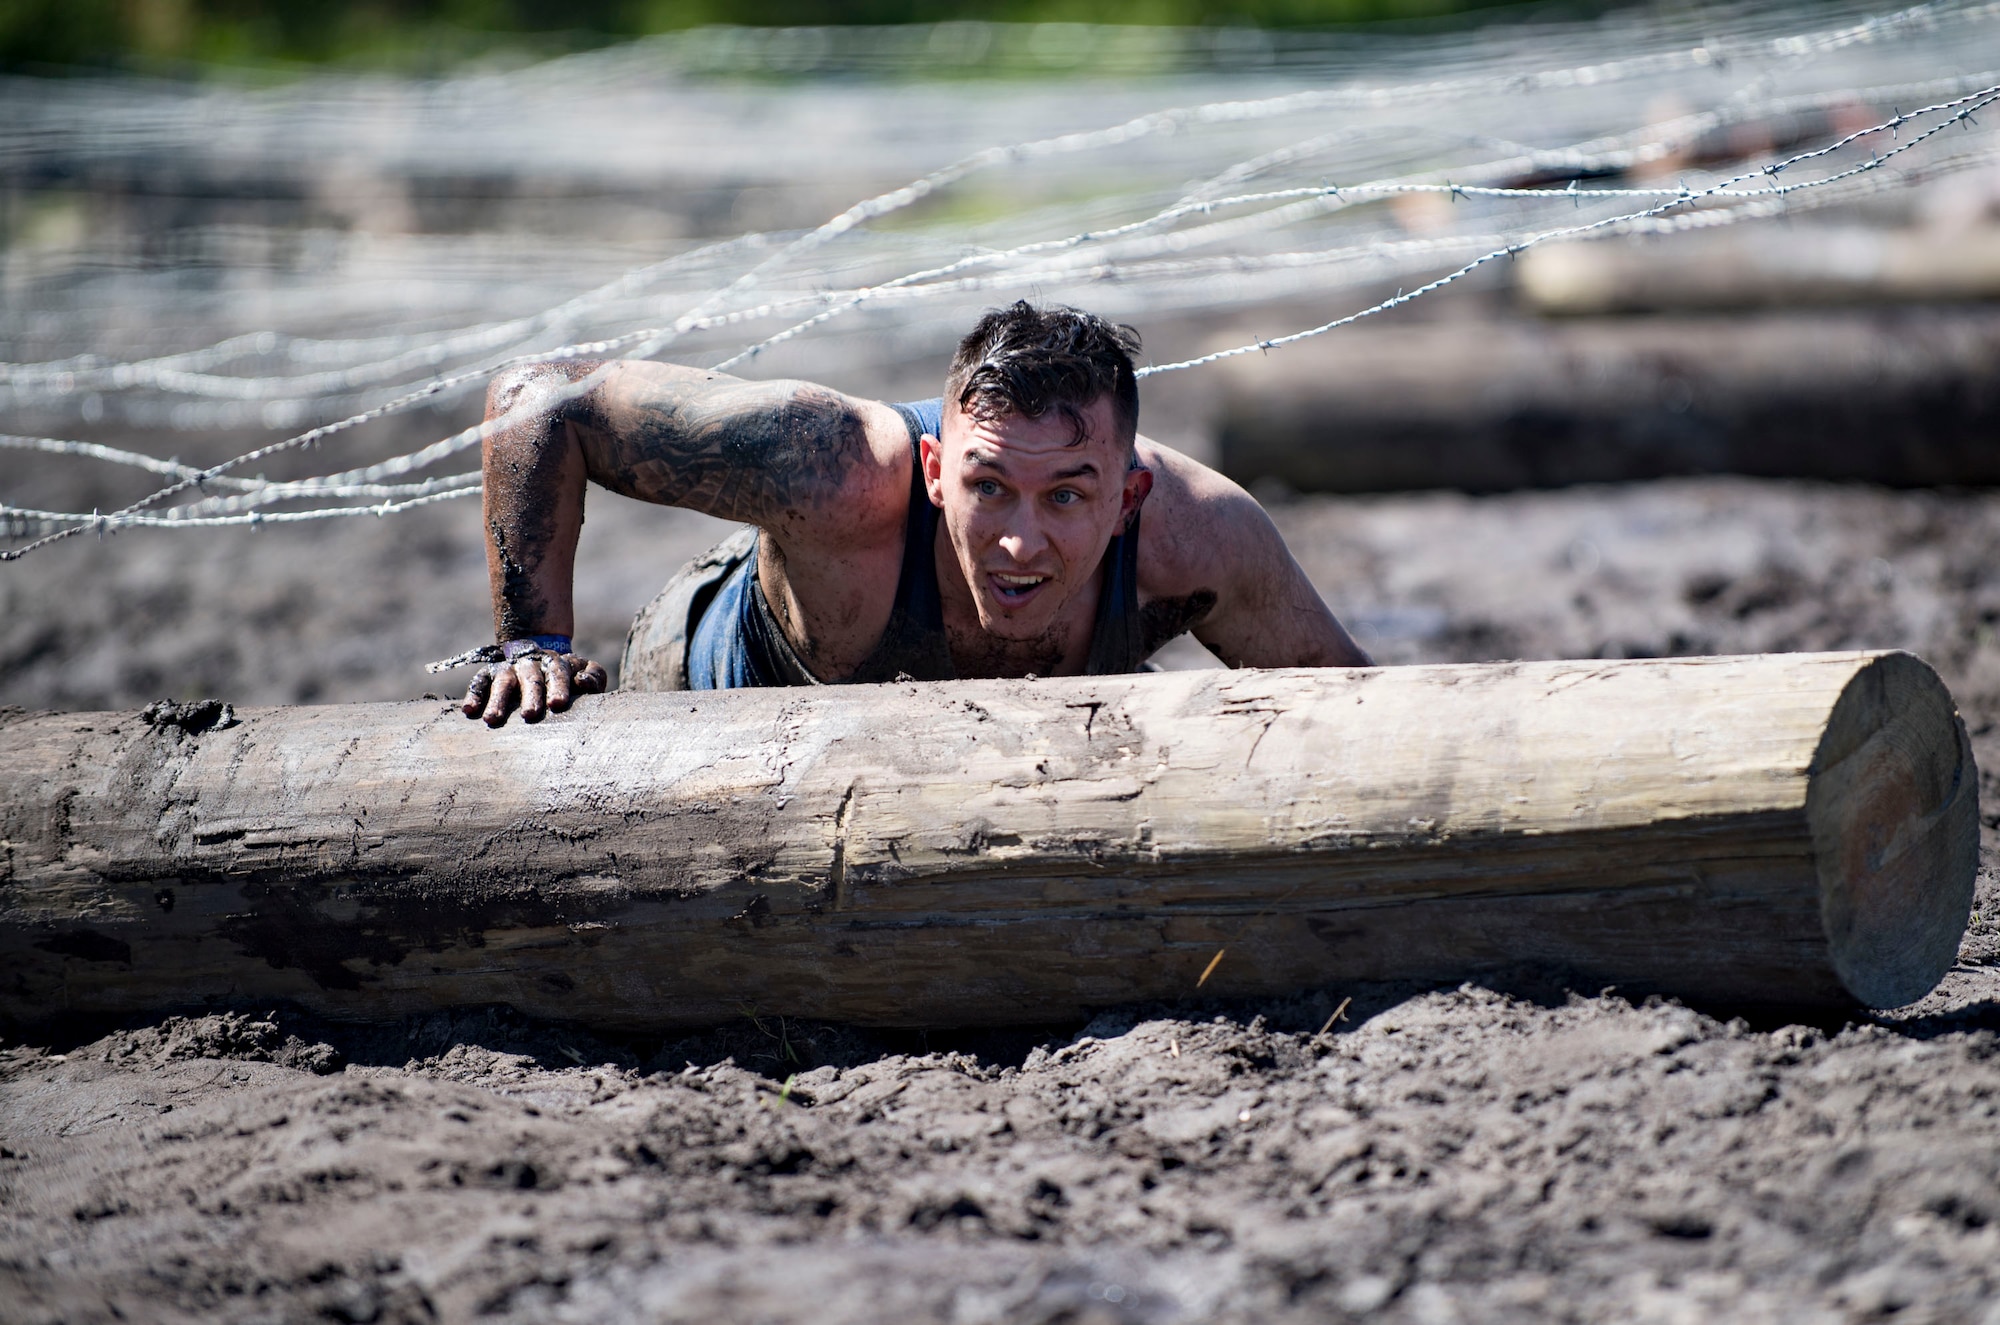 A participant low-crawls over a log during the annual Moody Mud Run, May 6, 2017, in Ray City, Ga. The Fourth Annual Moody Mud consisted of both adult and child course that challenged more than 600 participants with obstacles over 4.2 miles. (U.S. Air Force photo by Airman 1st Class Daniel Snider)